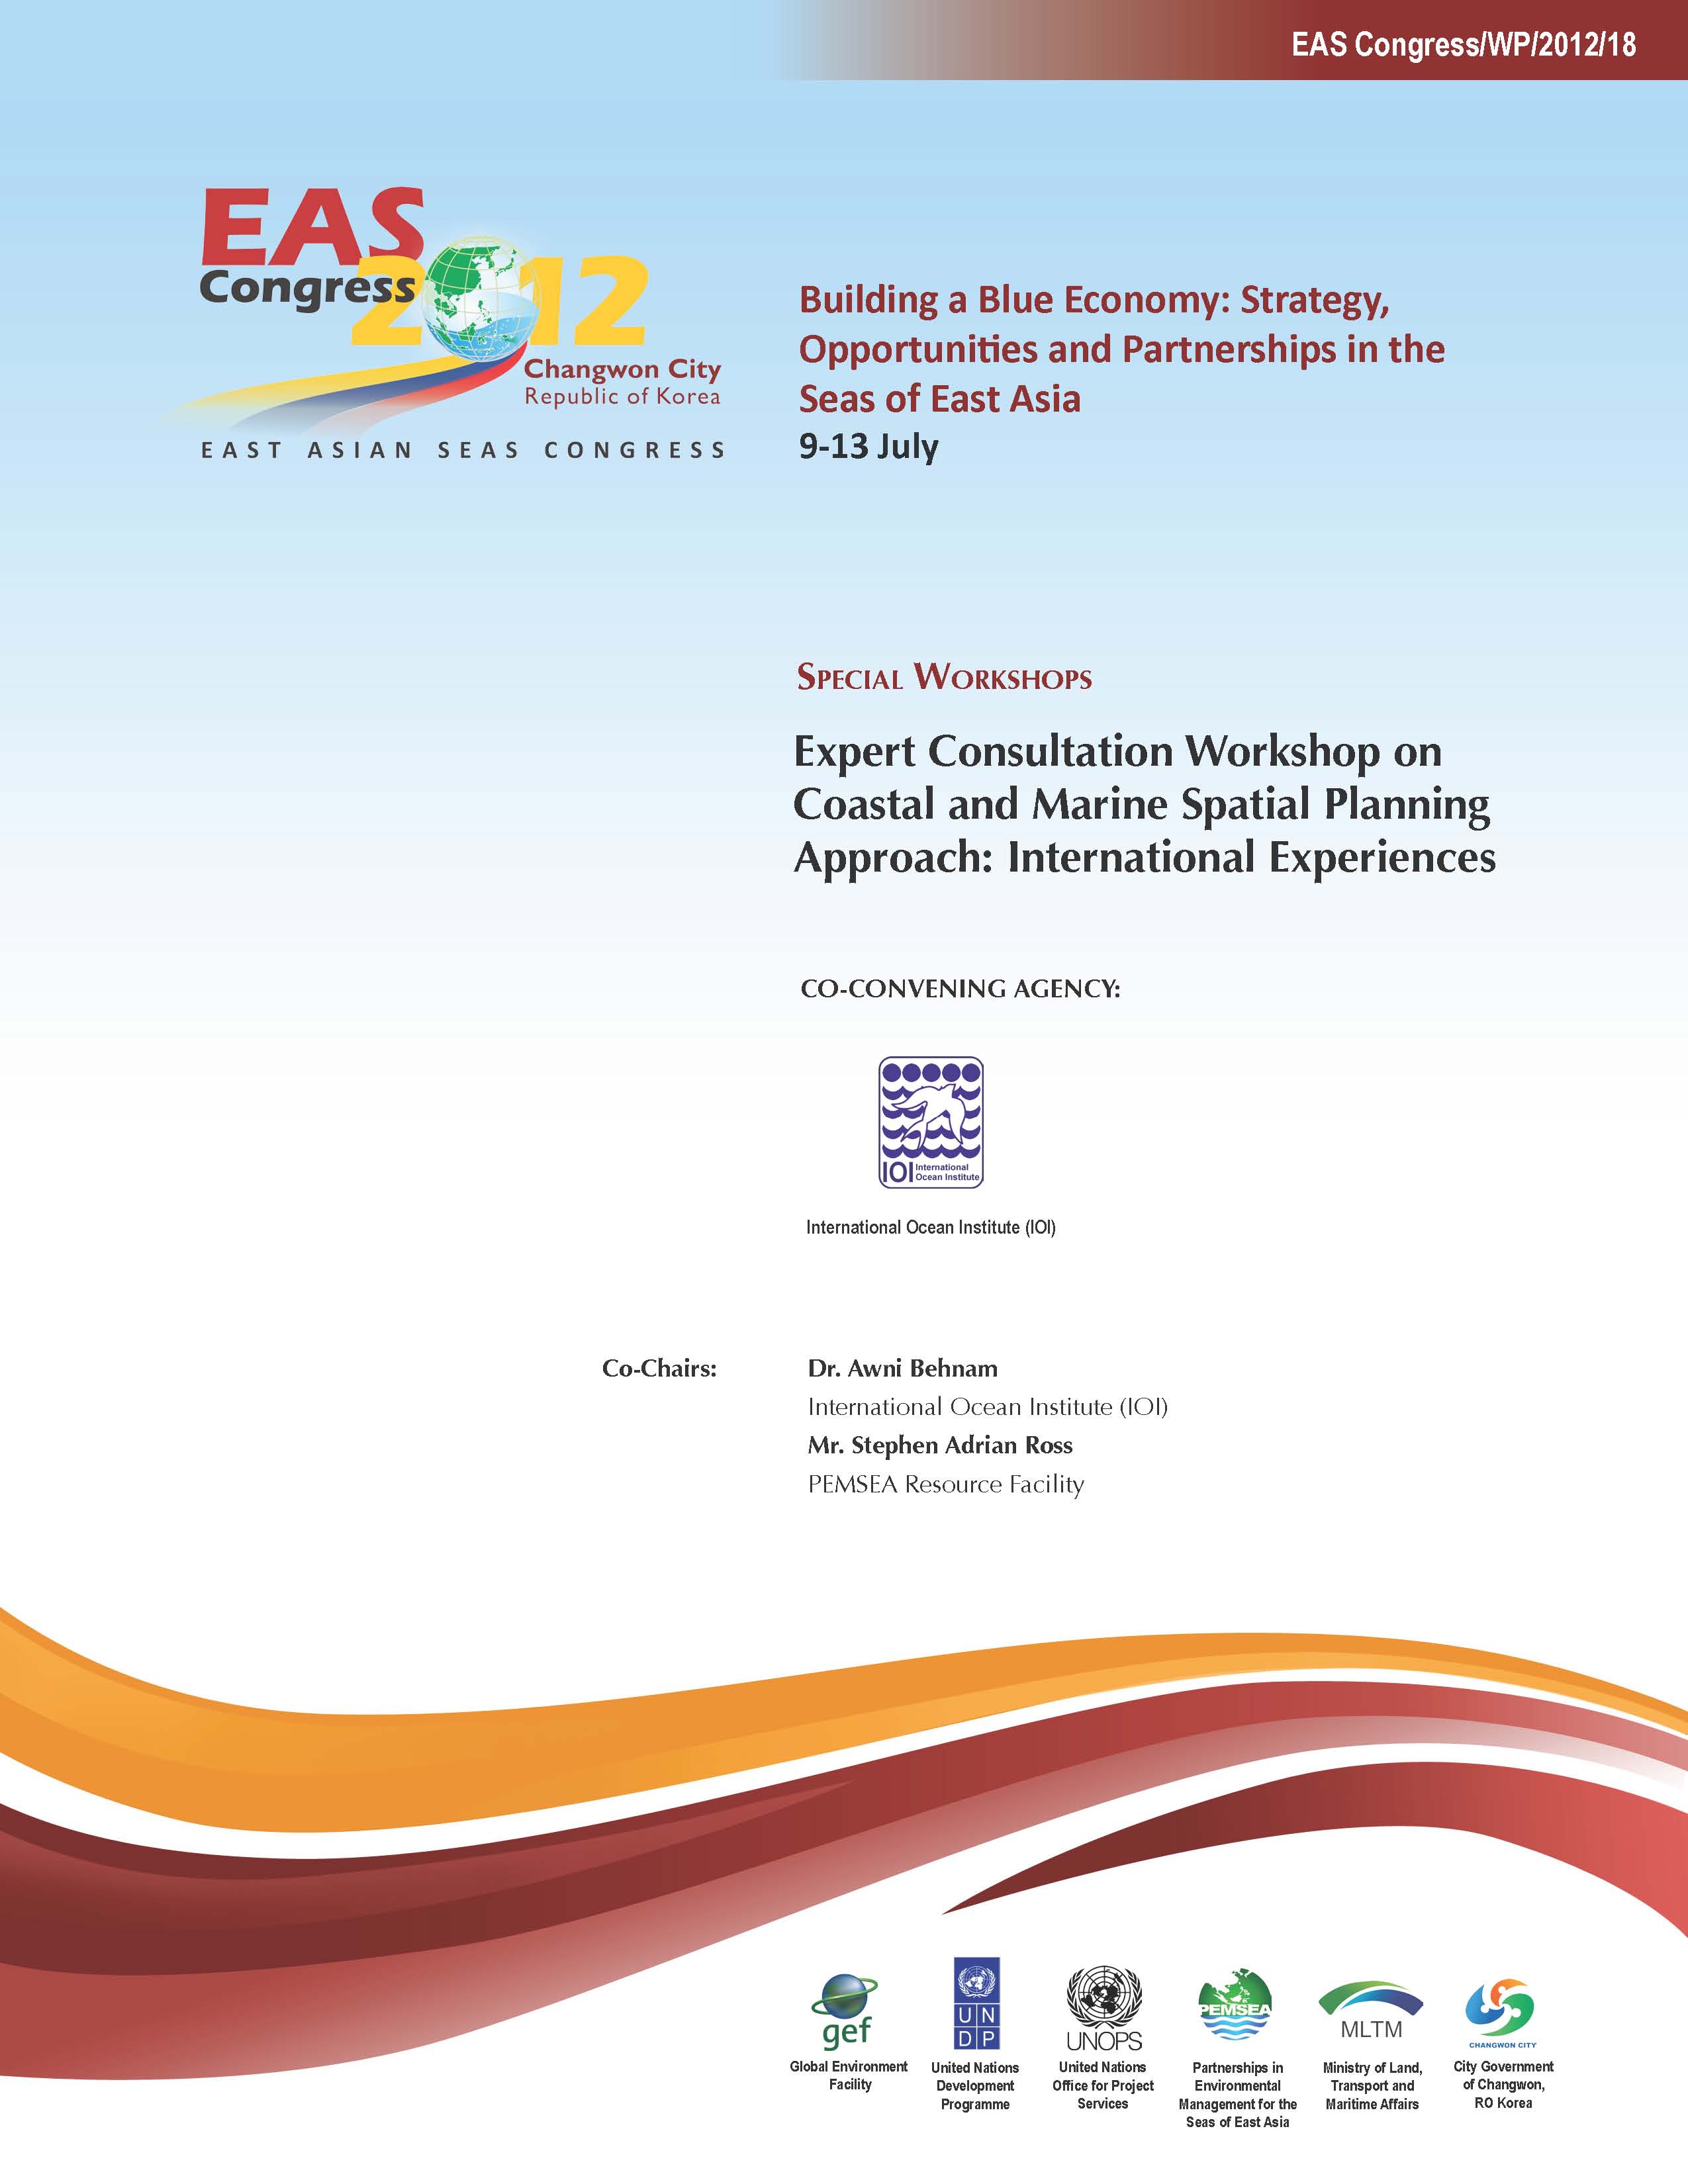 Proceedings of the Expert Consultation Workshop on Coastal and Marine Spatial Planning Approach International Experiences